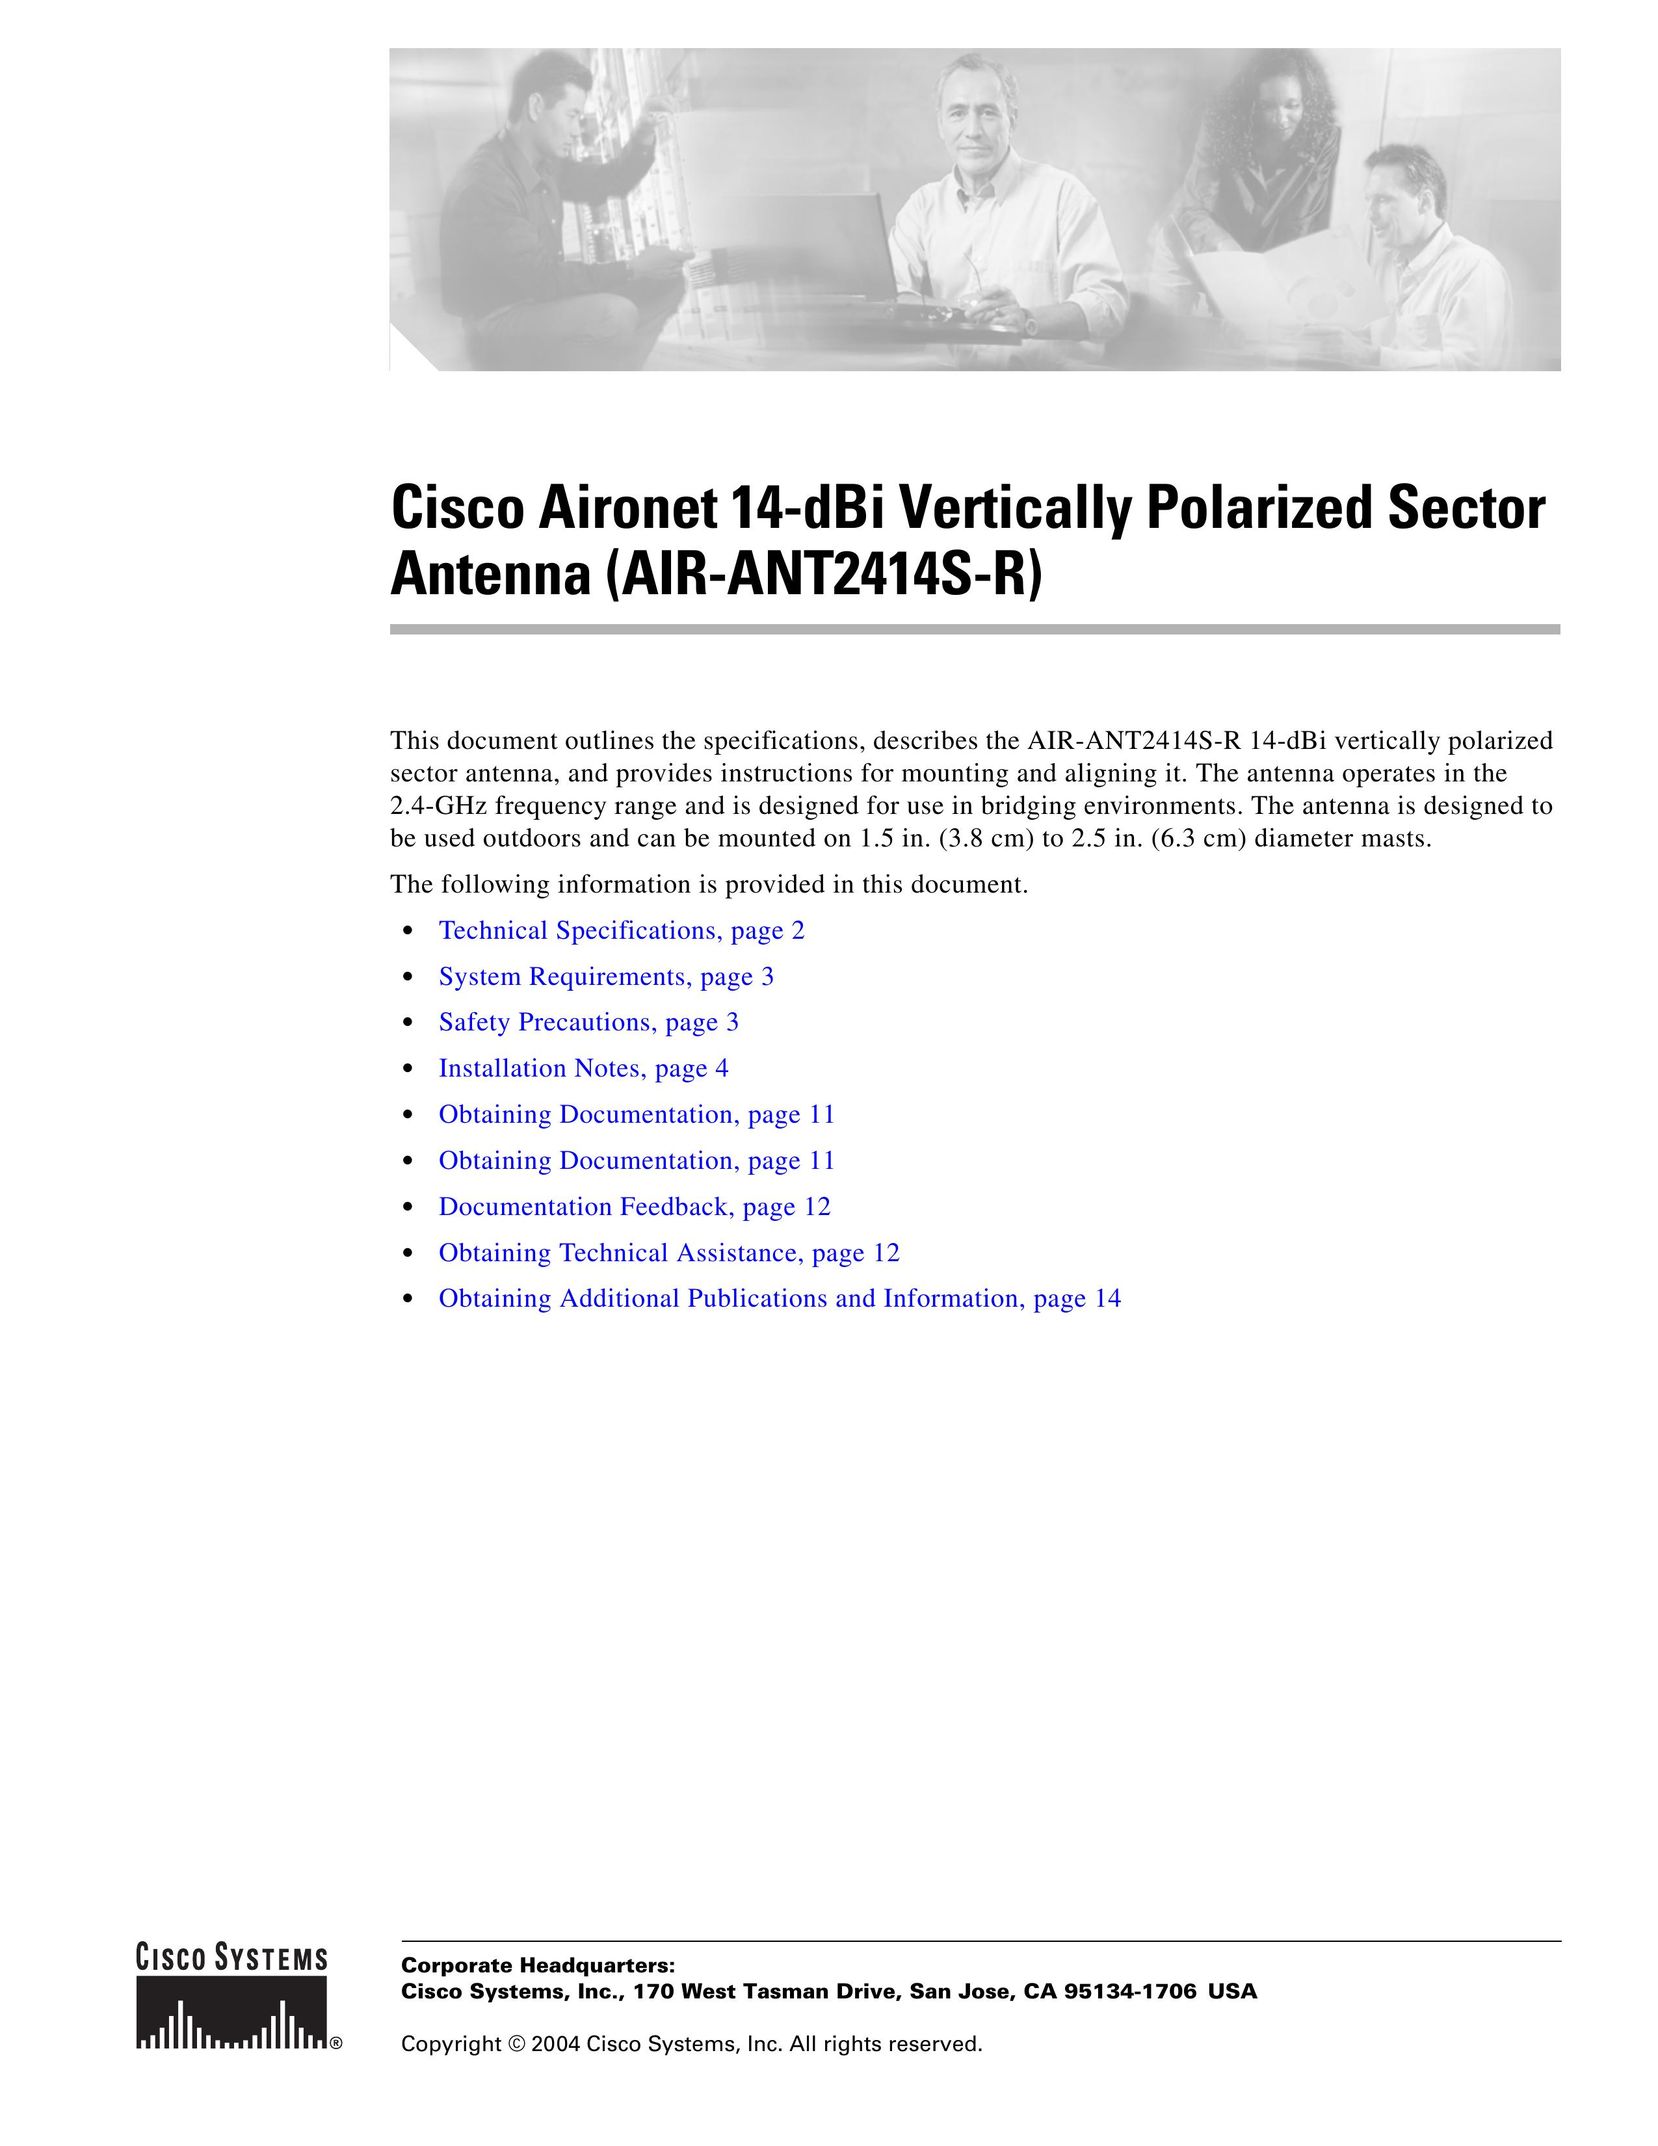 Cisco Systems AIR-ANT2414S-R TV Antenna User Manual